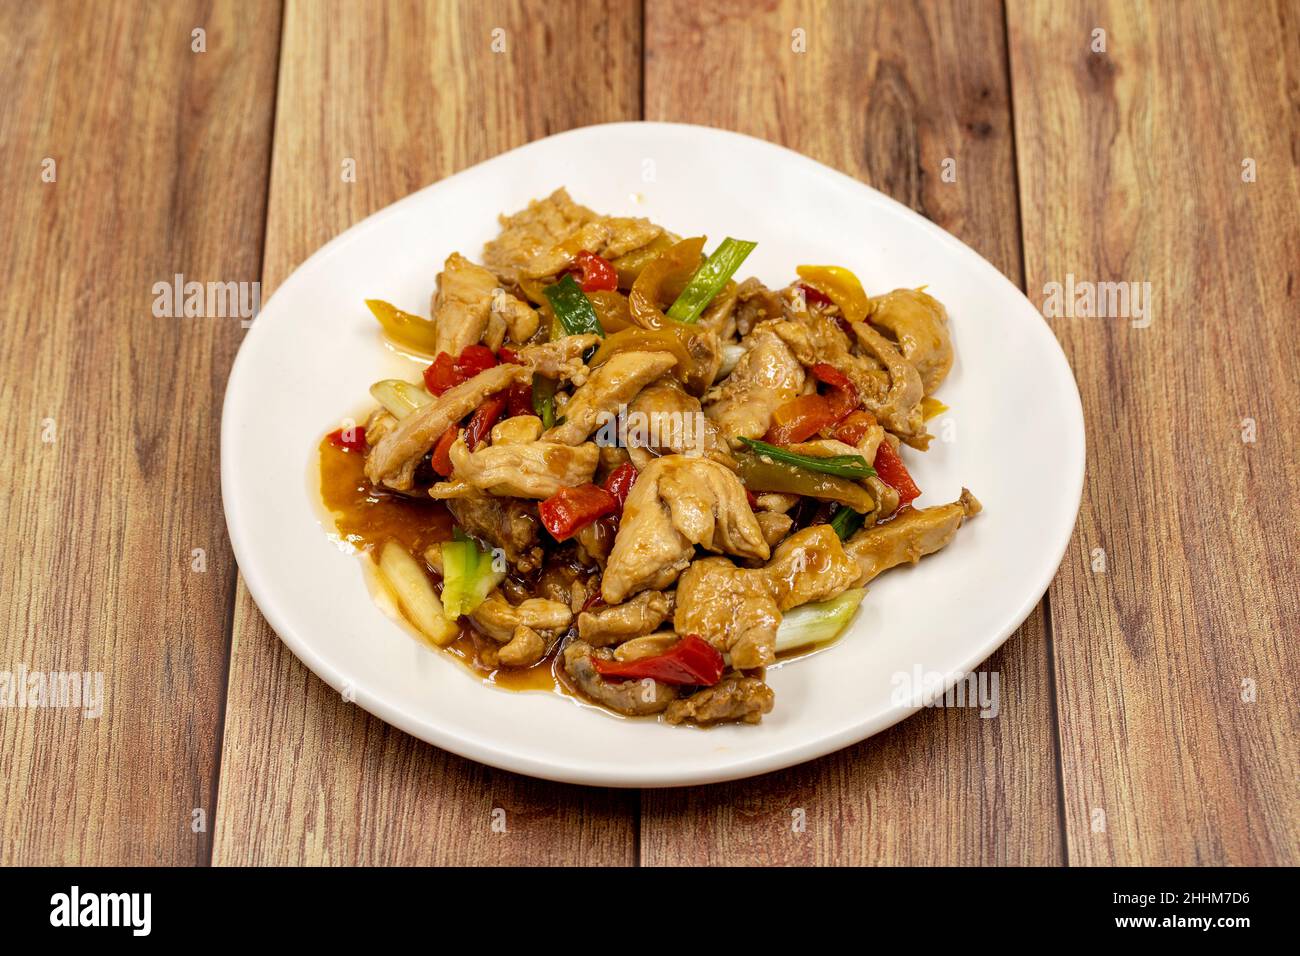 Chinese chicken dish. Chicken with olive oil and soy sauce. Traditional Chinese dish prepared with garlic, onion, capia pepper and green pepper Stock Photo